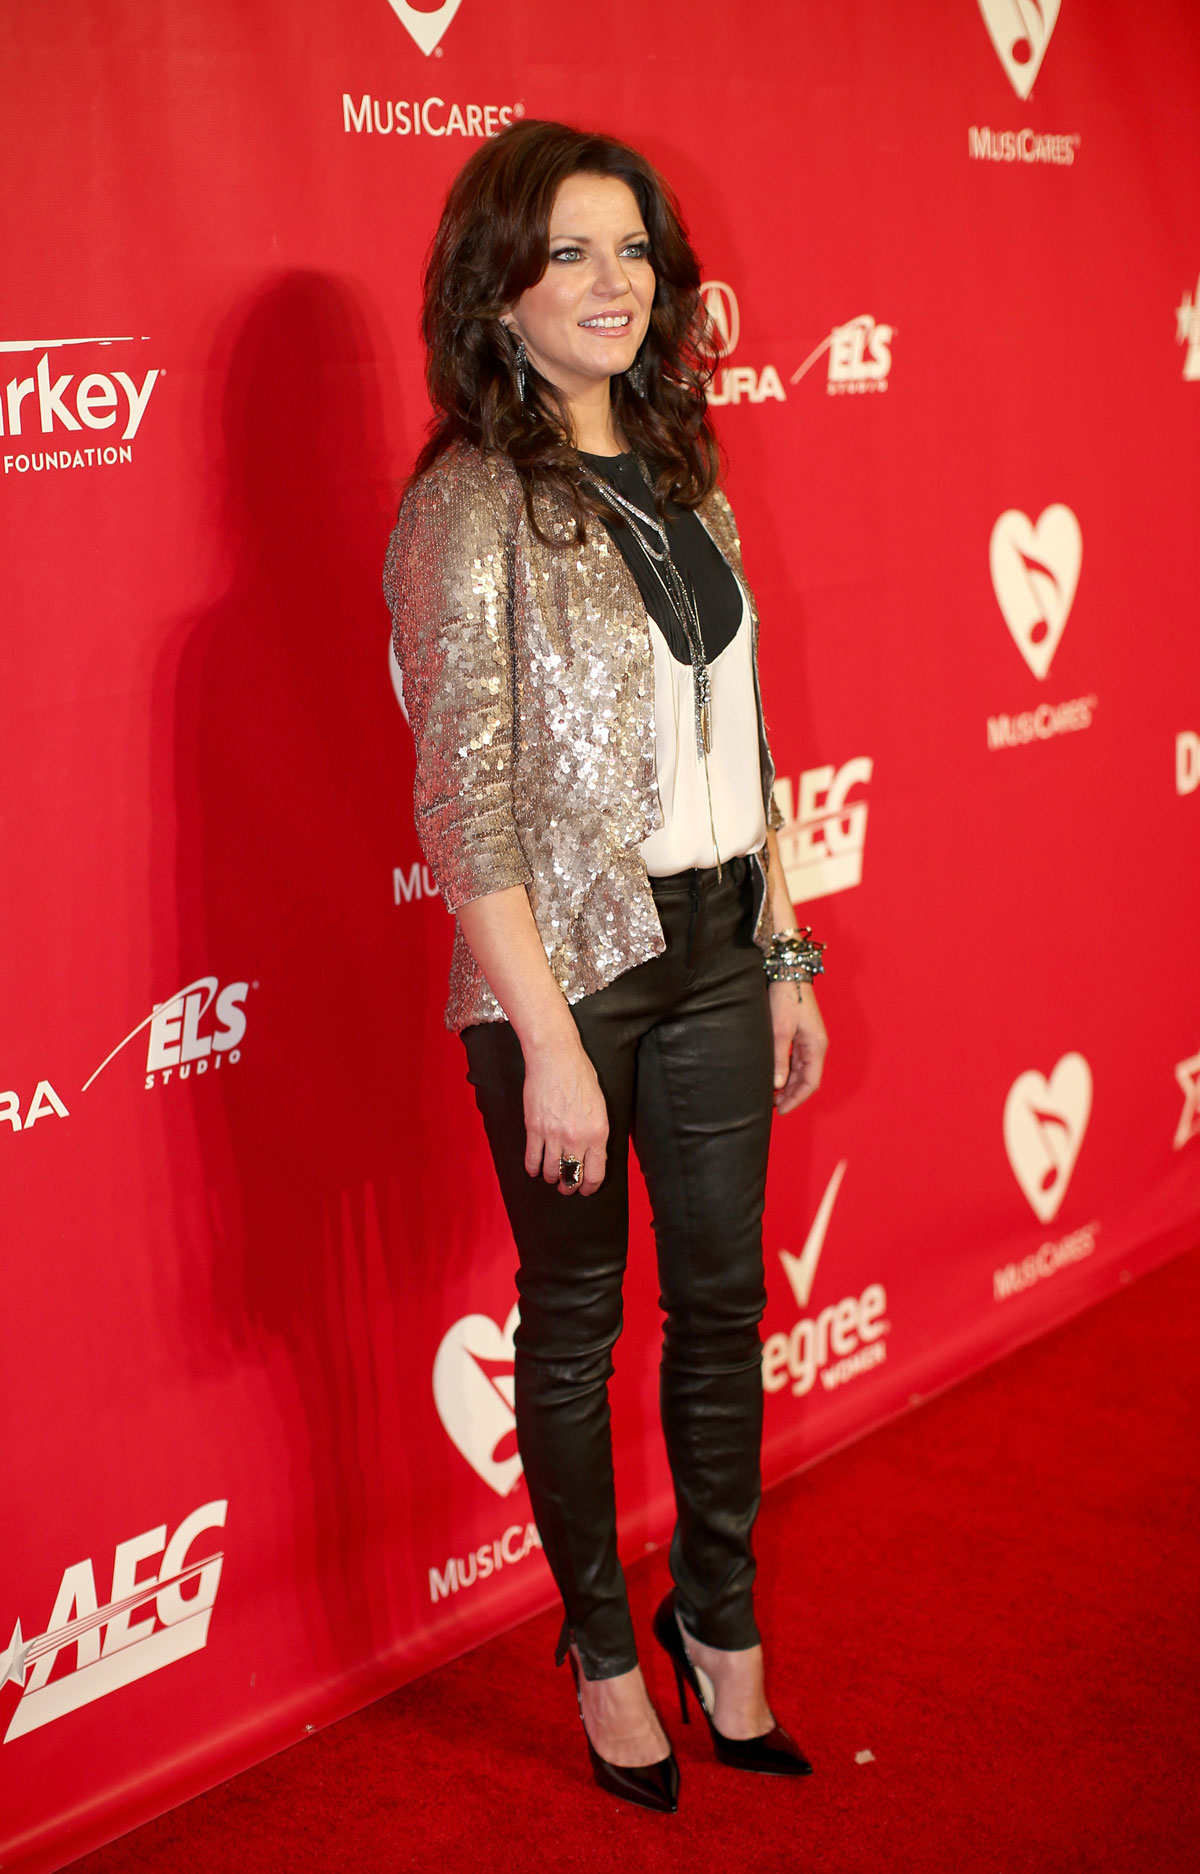 Martina McBride attends MusiCares Person Of The Year Honoring Carole King